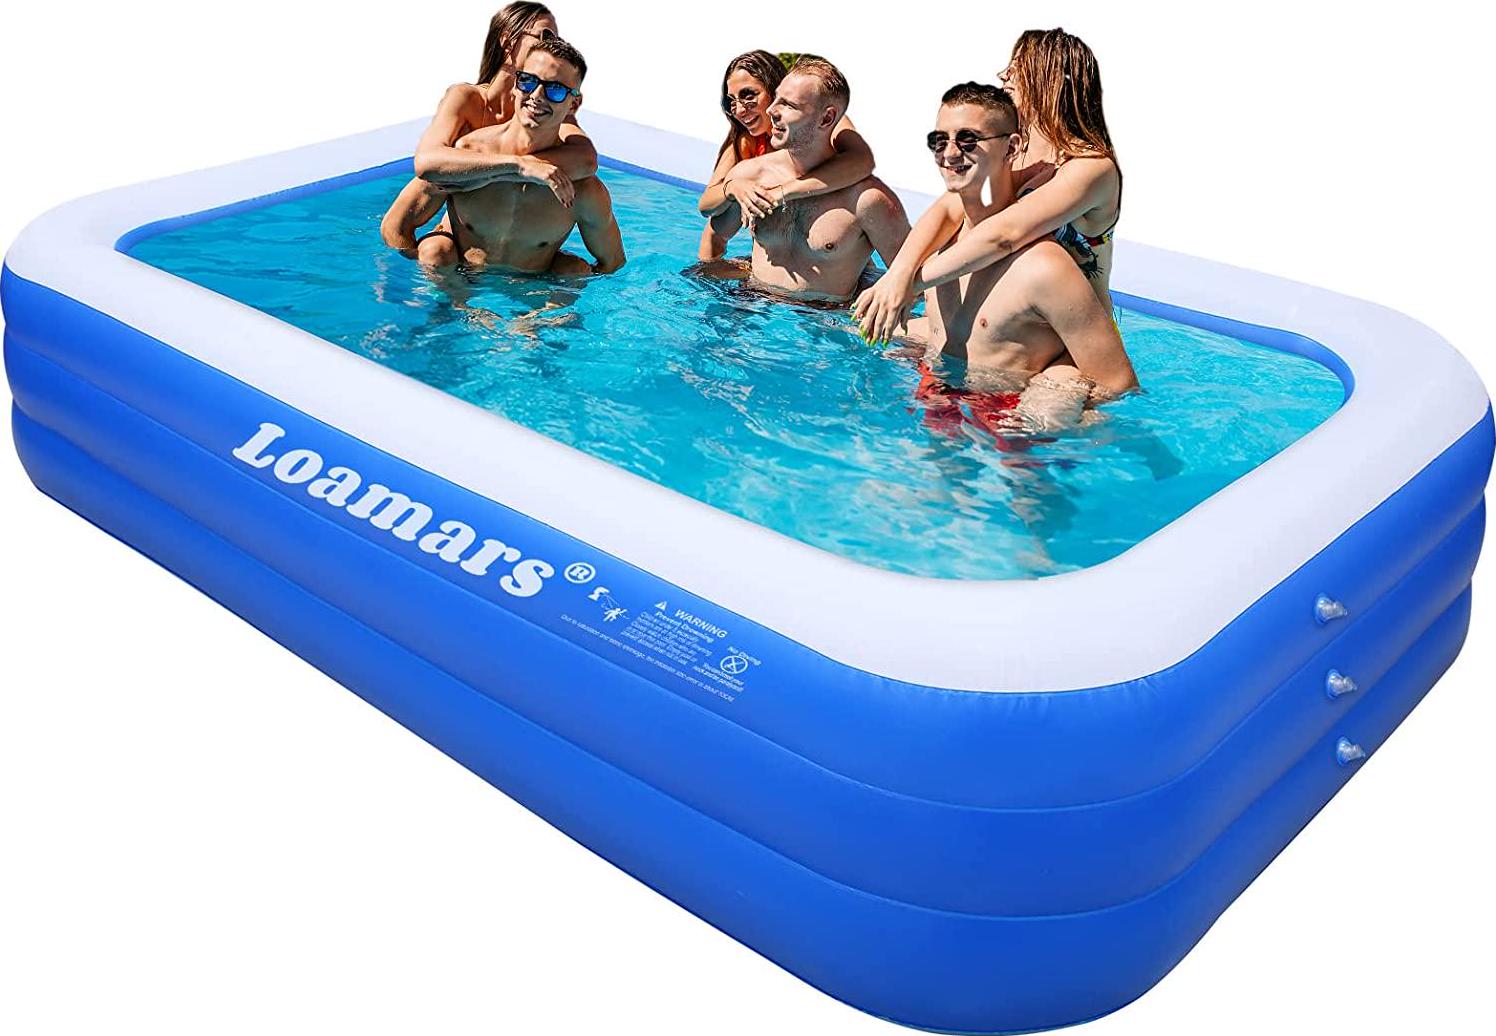 Loamars Inflatable Pool for Adults, 120 * 72 * 22 Inch Inflatable Swimming Pool for Kids, Full-Sized Thickened Family Blow Up Pool, Extra Large Kids Pools for Backyard, Garden, and Summer Water Party-